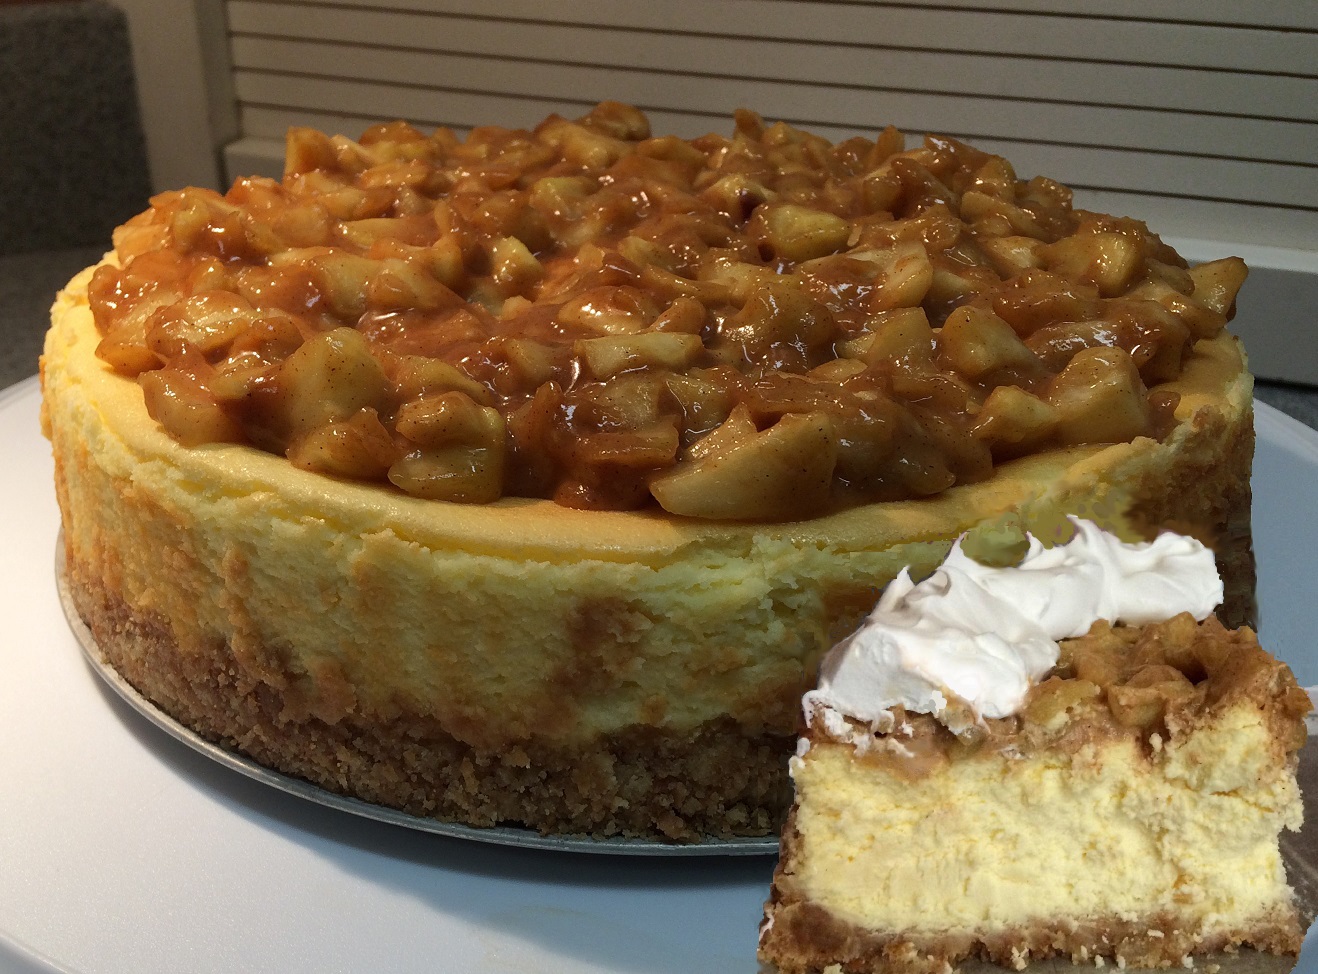 Apple Cheesecake with Caramel Sauce